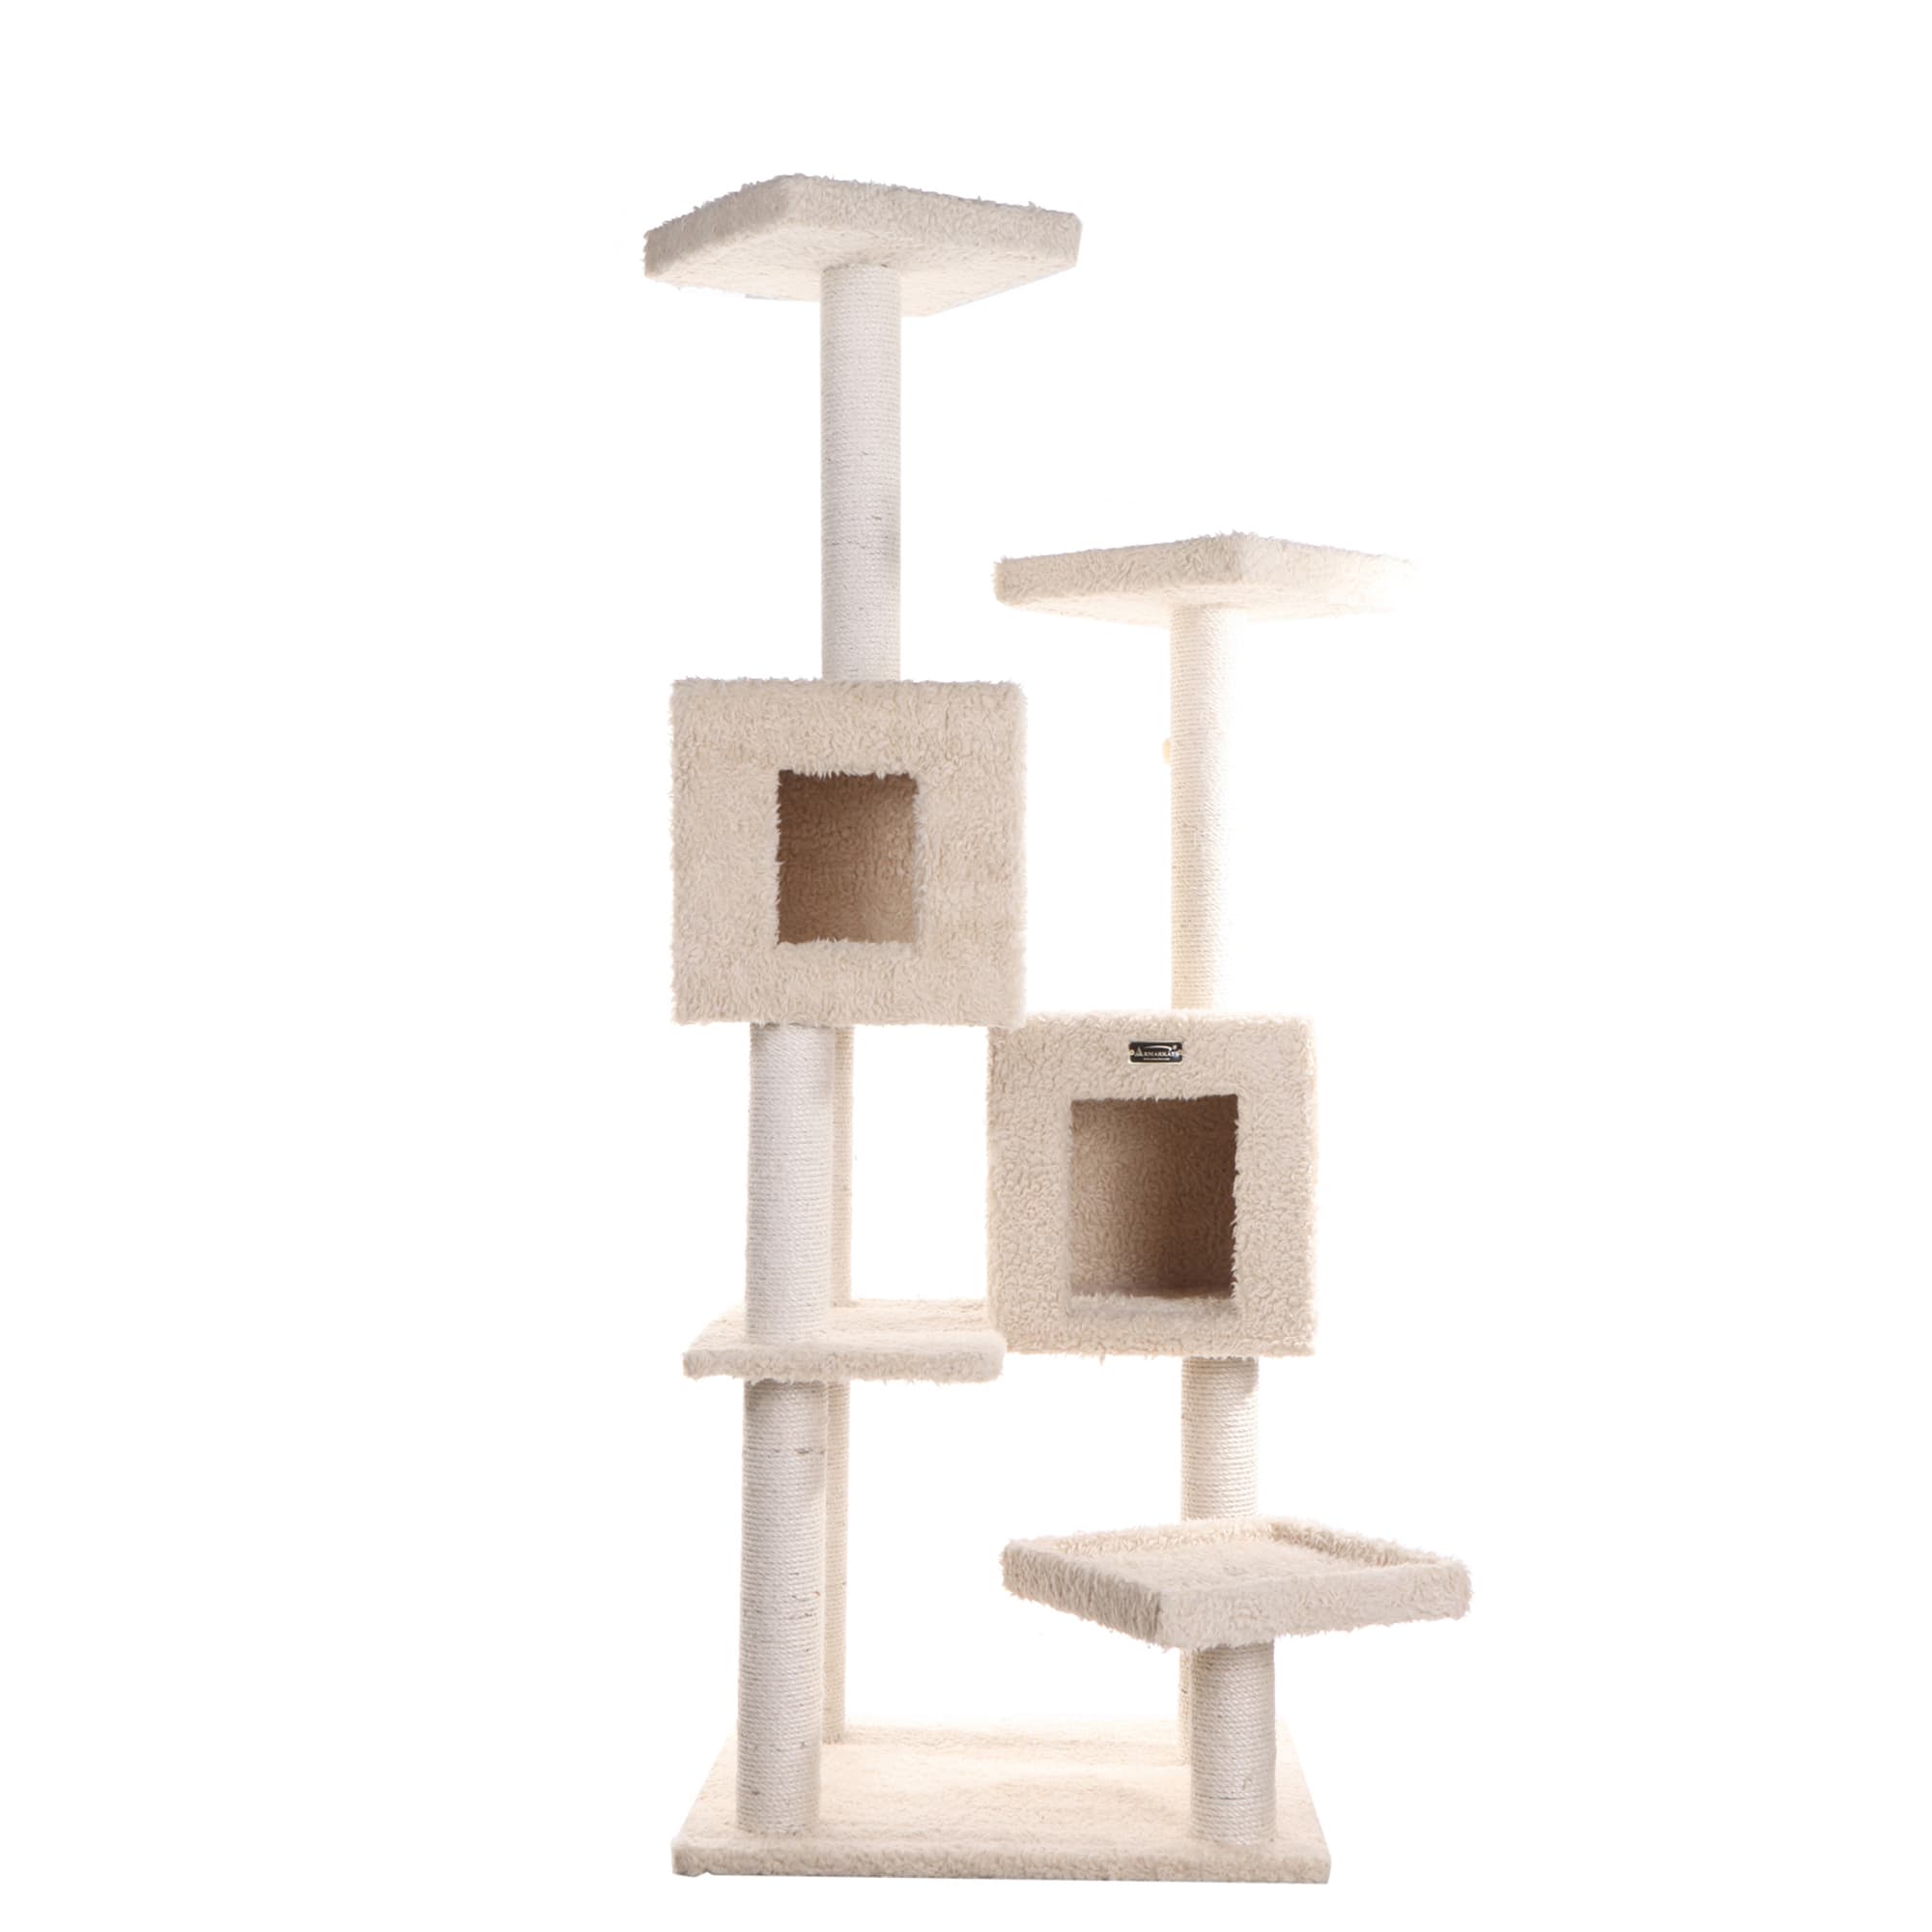 Photos - Other for Cats Armarkat Classic Real Wood Cat Tree Model A6702 Beige, 67" H, Med 